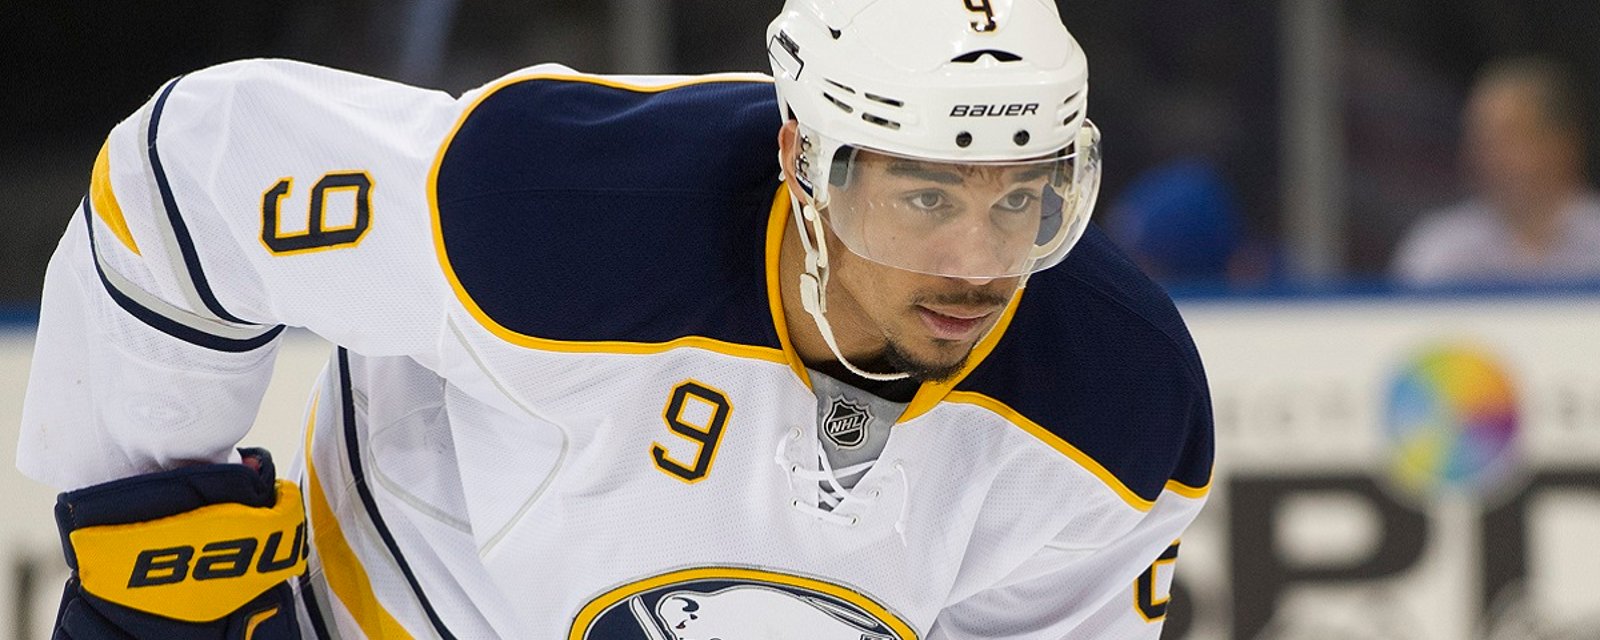 Breaking: Head coach confirms a major injury to Evander Kane.